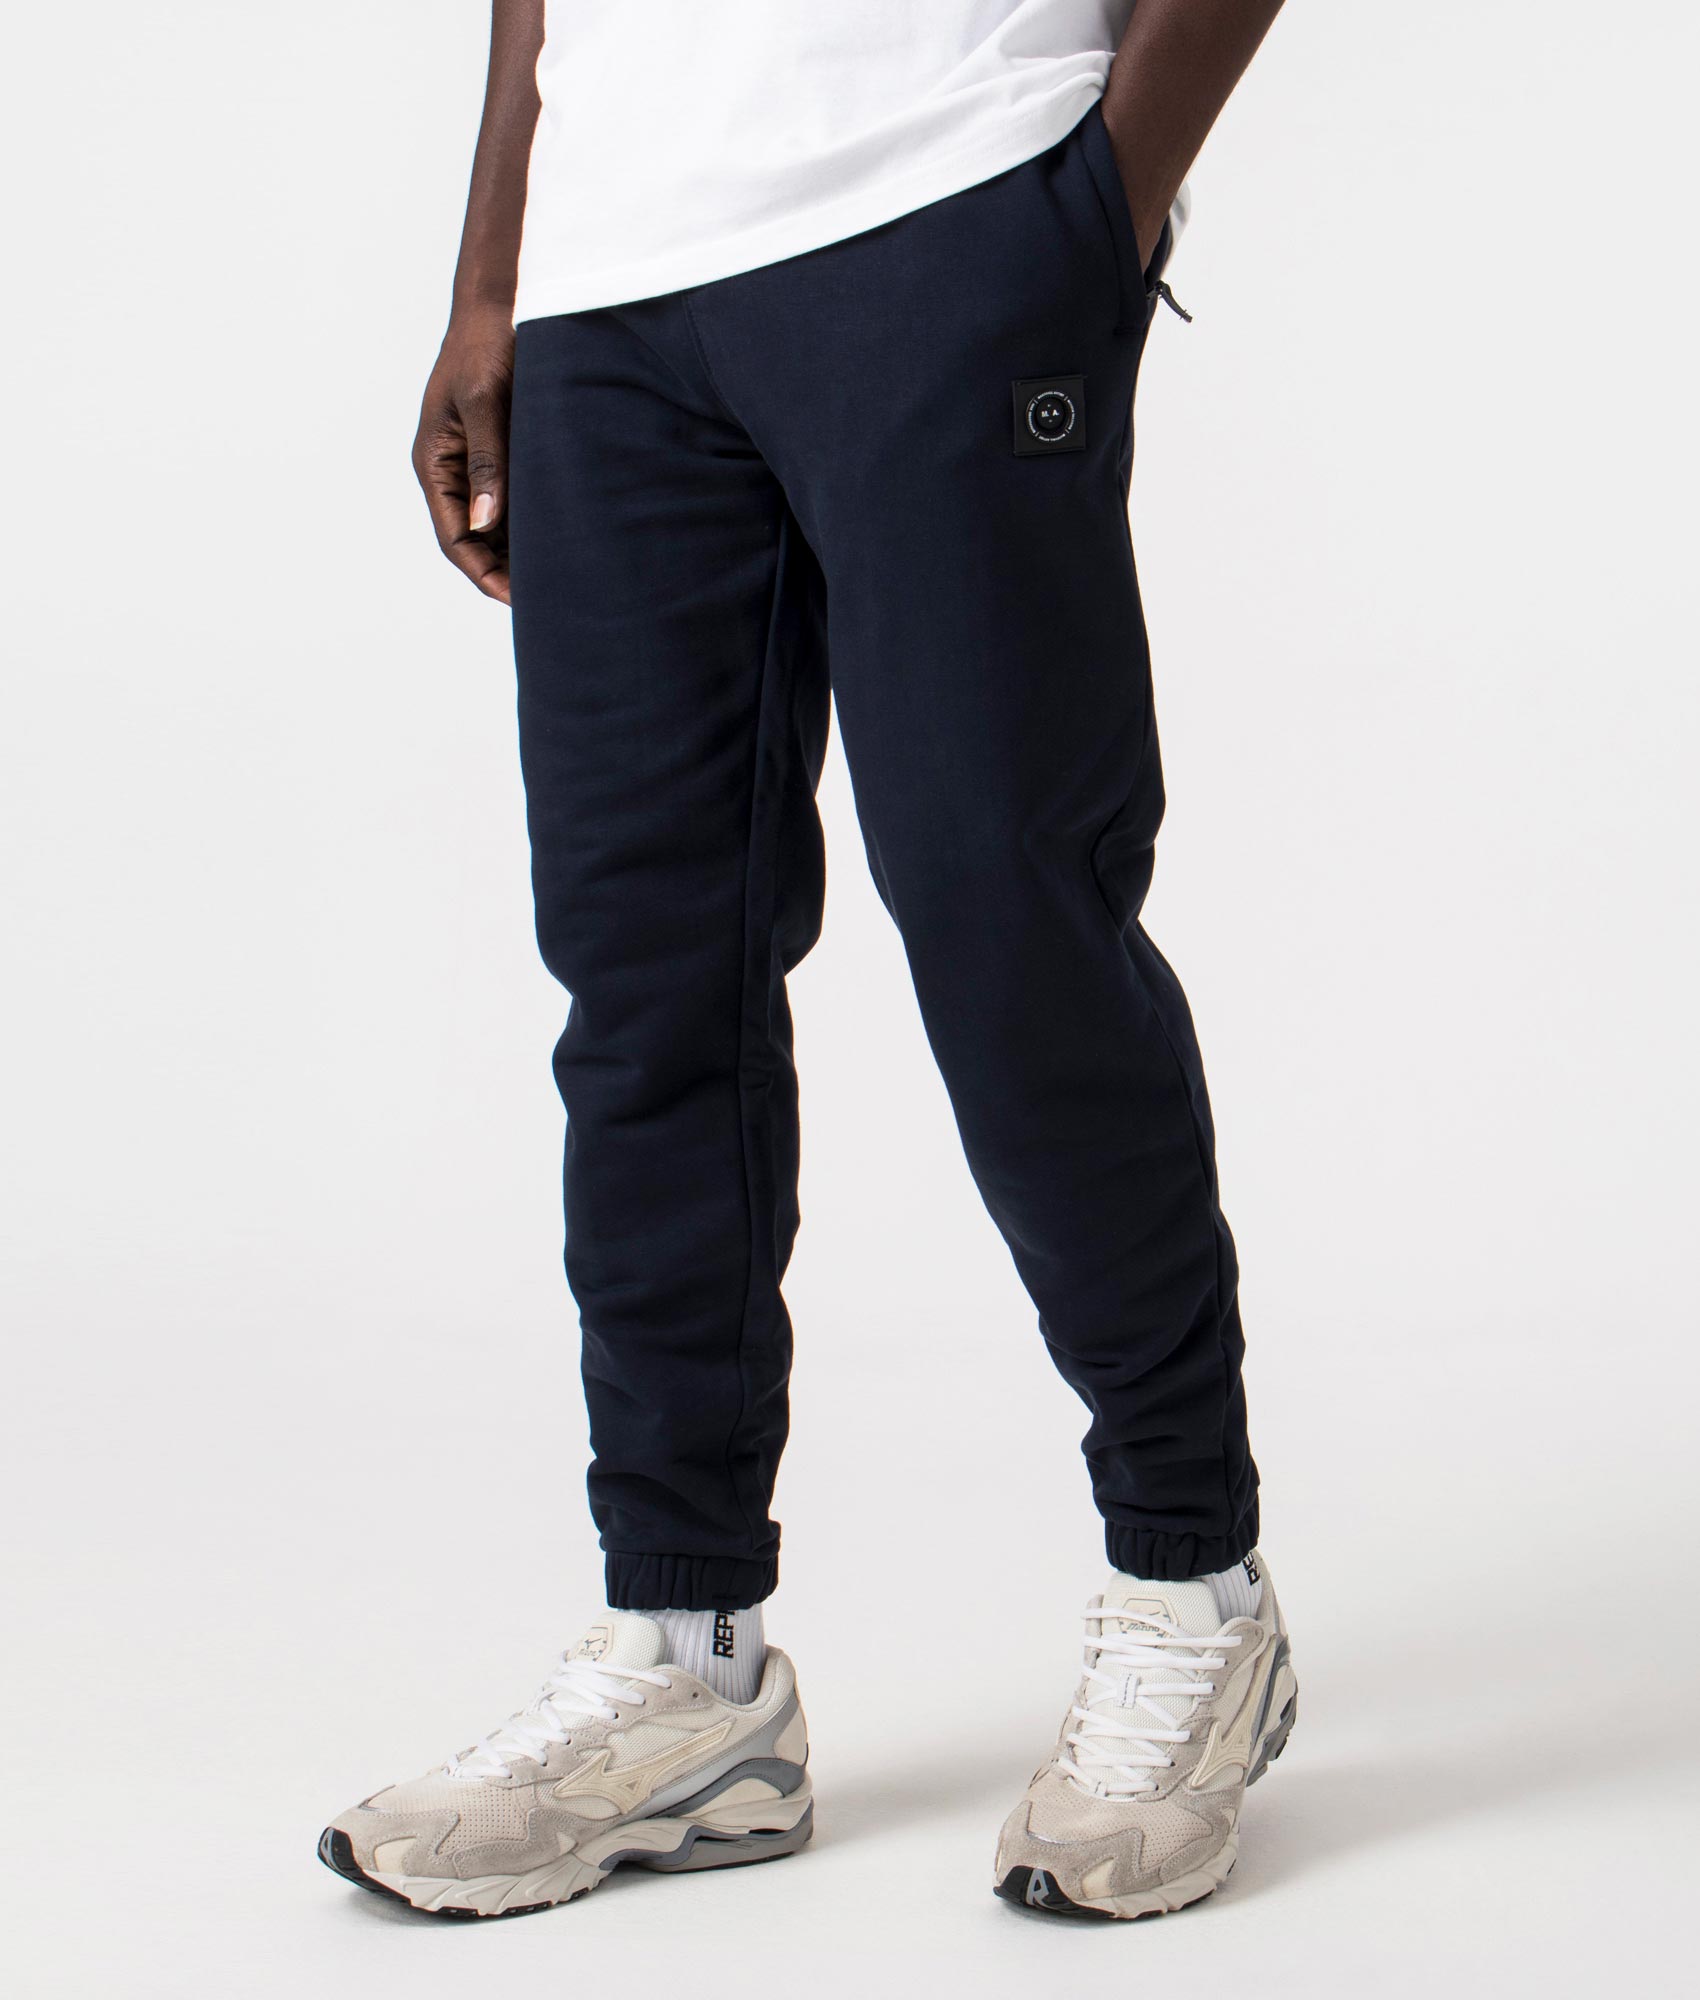 Marshall Artist Mens Siren Joggers - Colour: 003 Navy - Size: Large